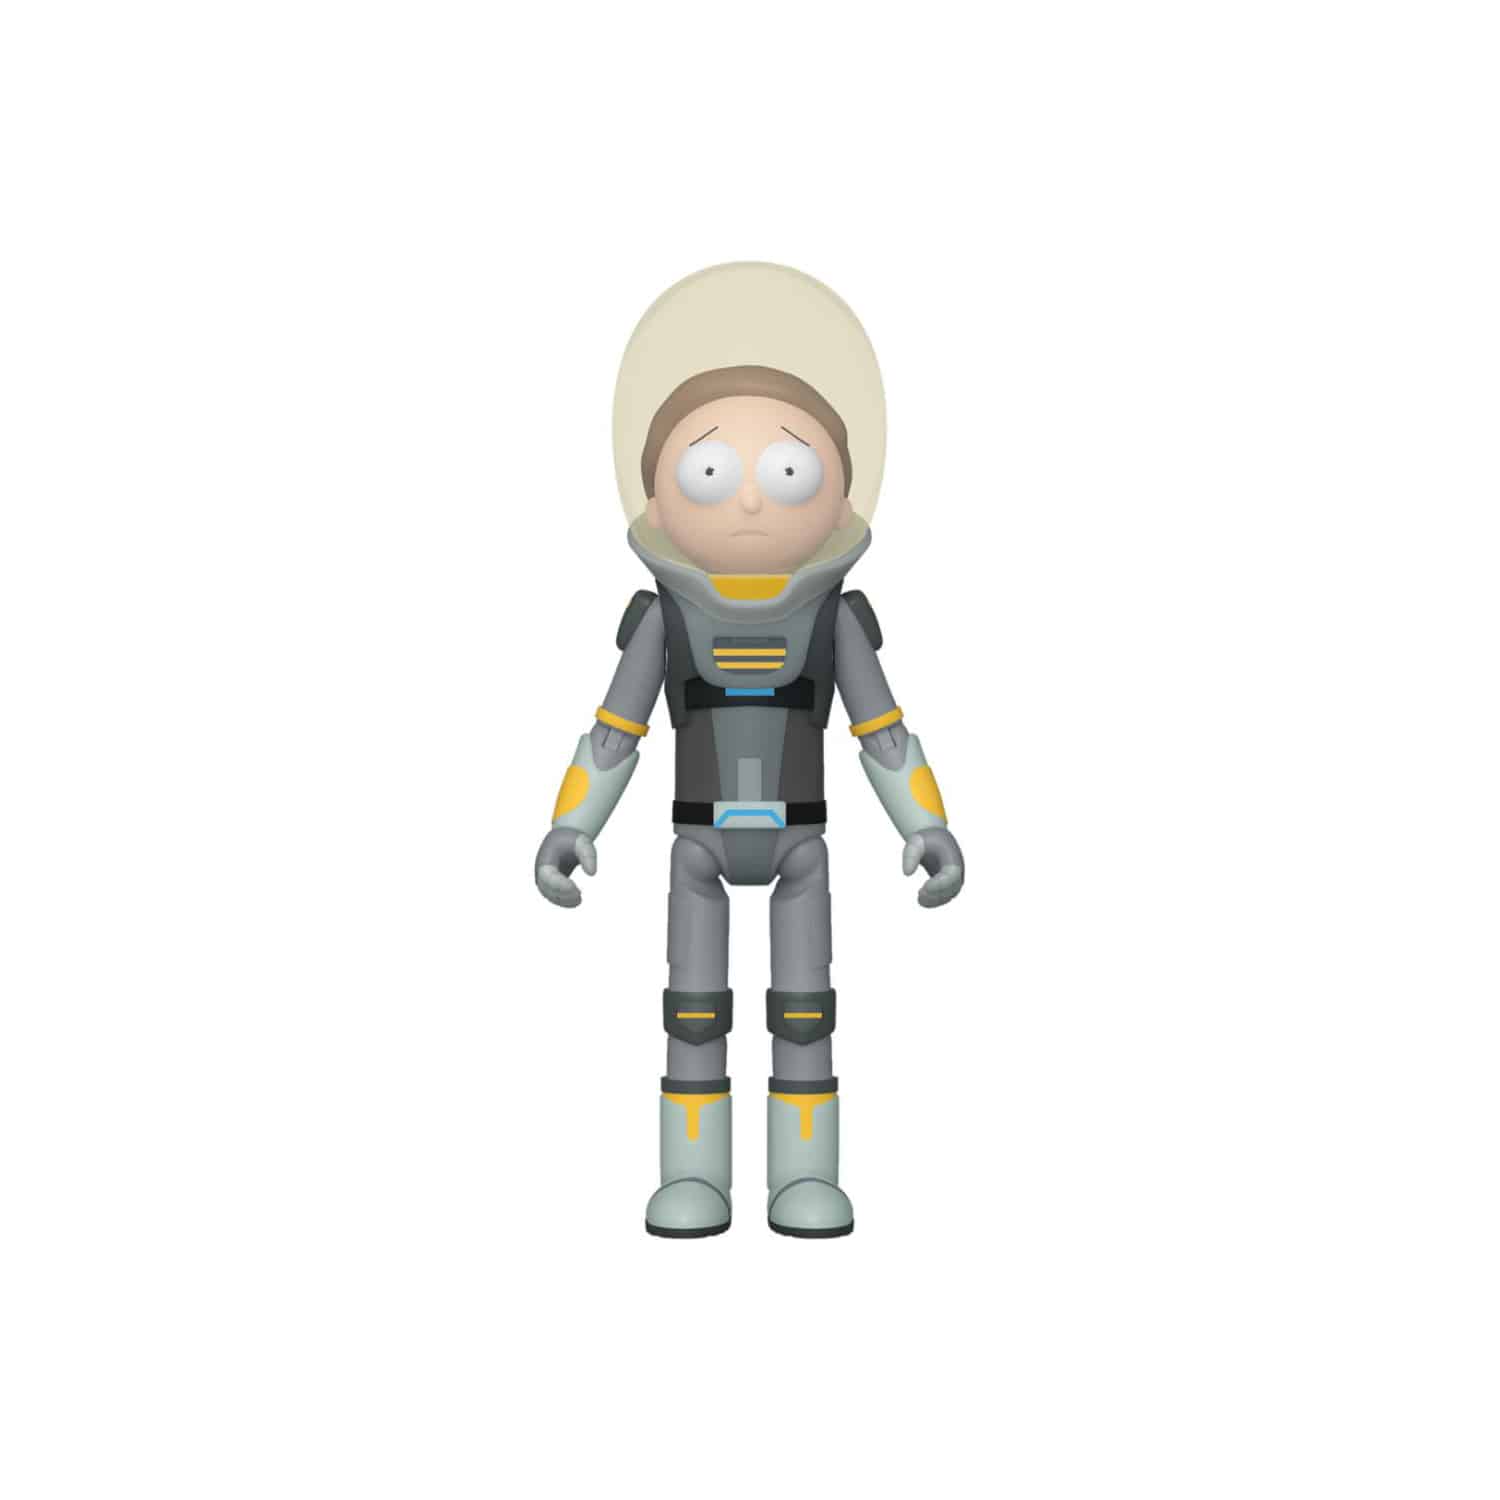 Rick & Morty - Space Suit Morty Funko Action Figure